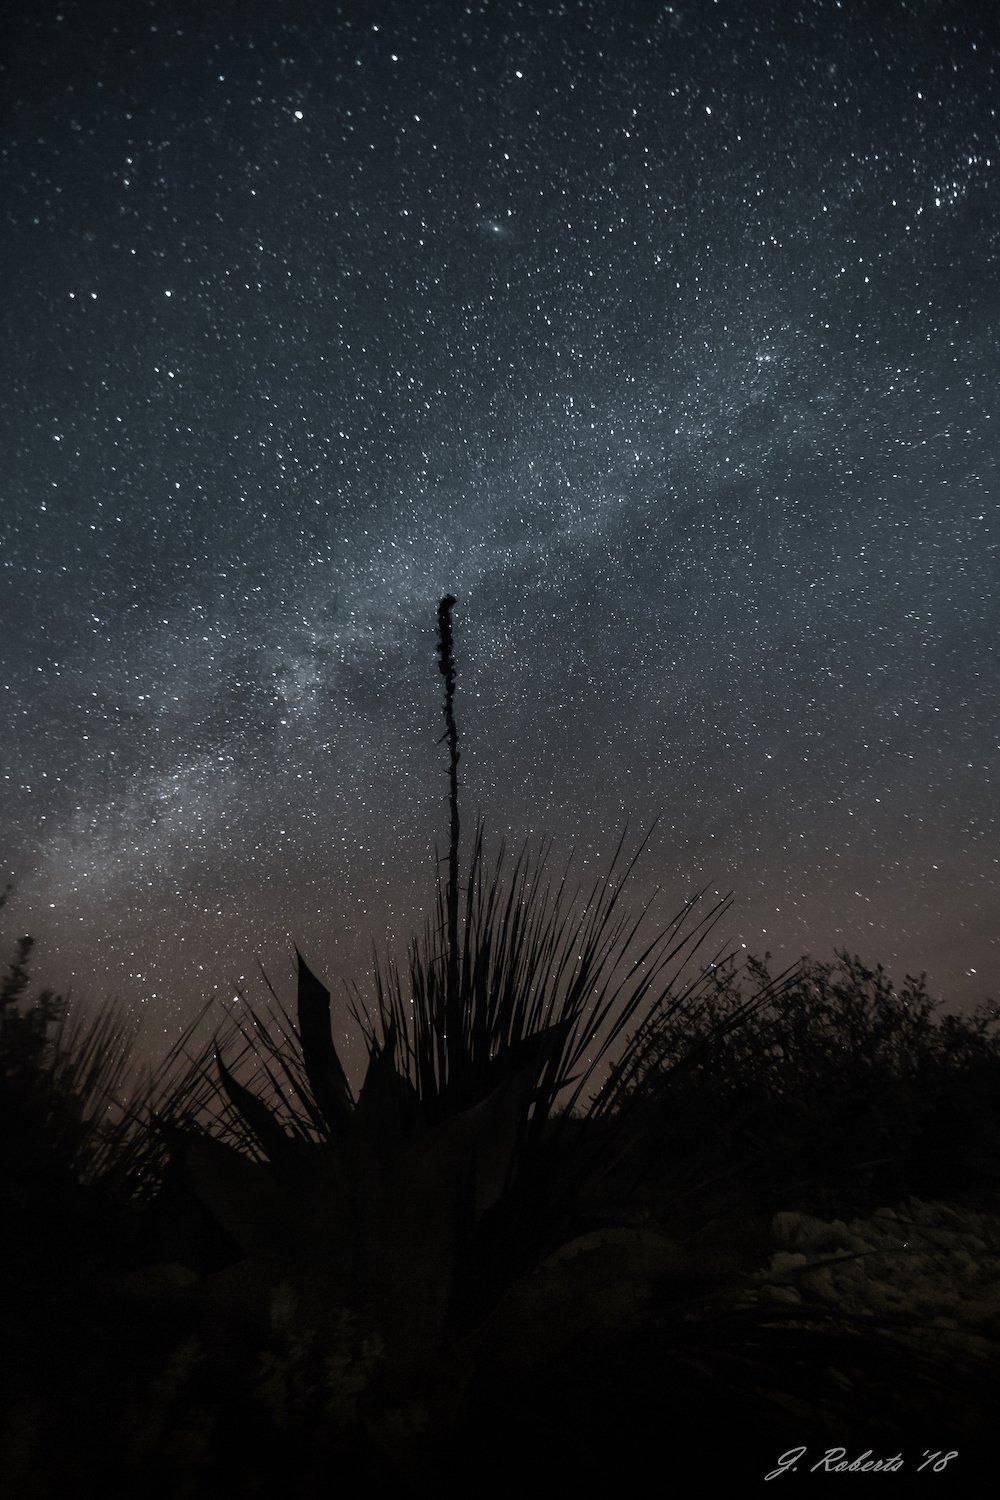 Devils River State Natural Area Designated as First International Dark Sky Sanctuary in Texas, Sixth in World Image